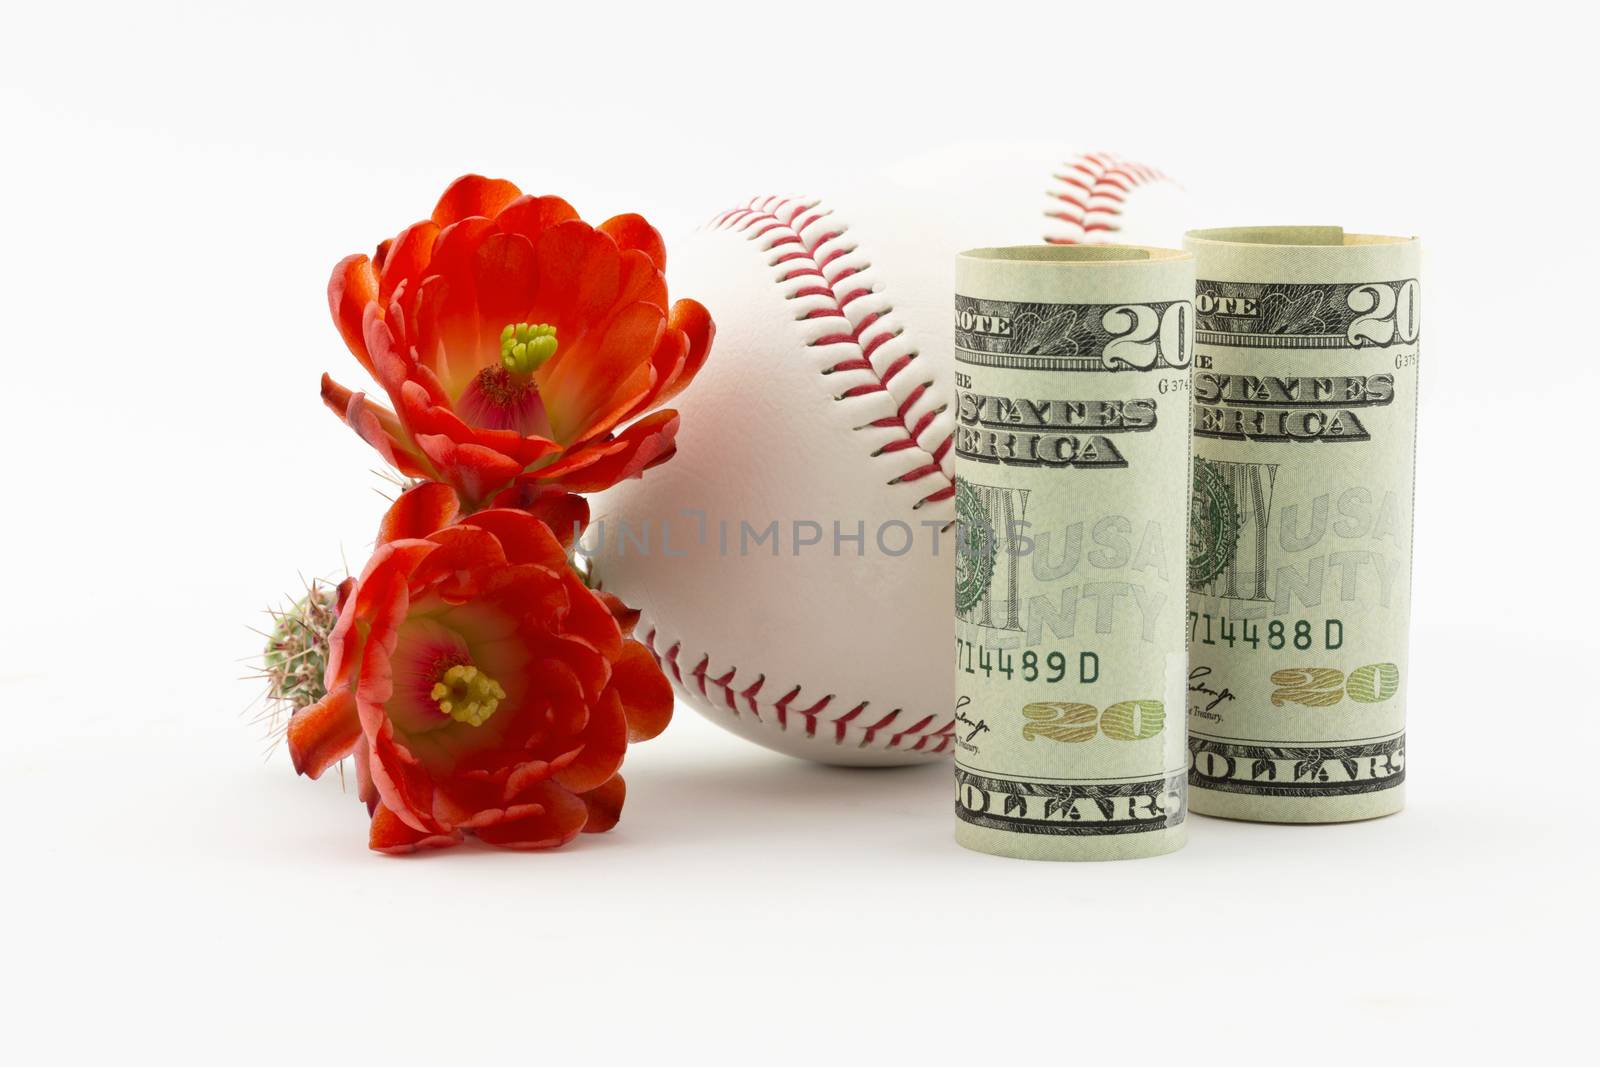 Two baseballs placed with American currency and red cactus flowers on white background.  Spring training for major league baseball has a series of practice and exhibition Cactus League games.  Sites include locations such as Phoenix in Arizona. 